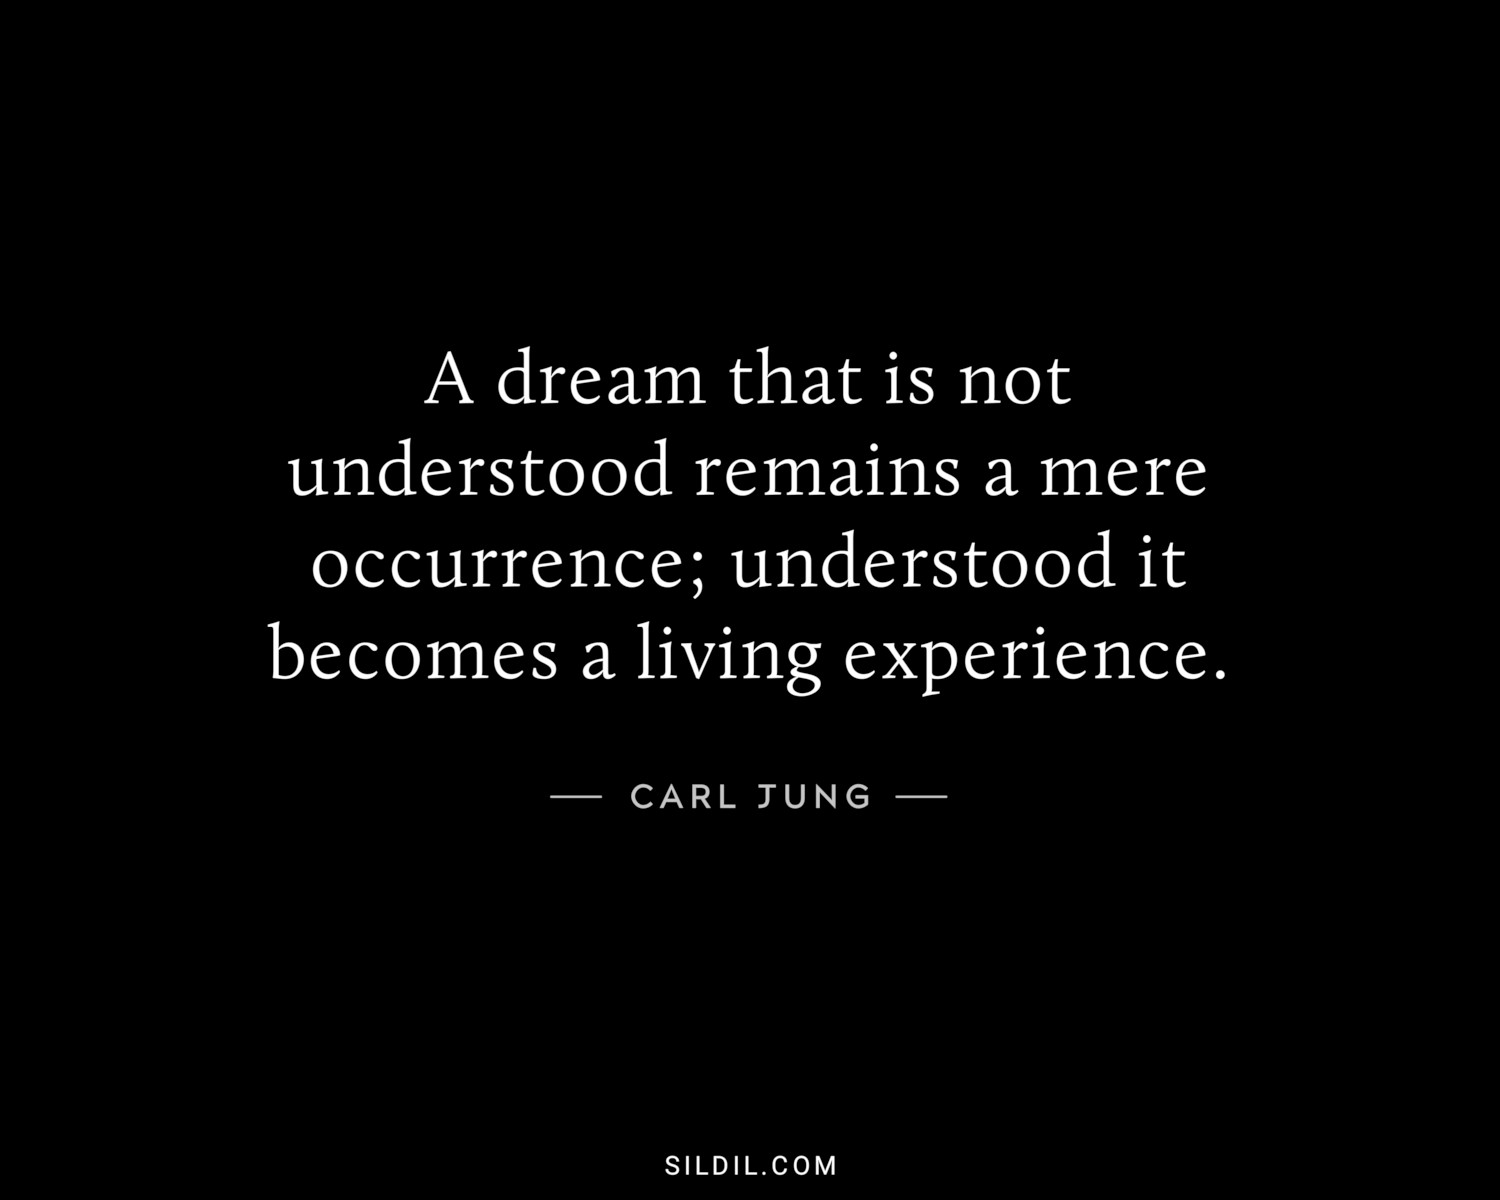 A dream that is not understood remains a mere occurrence; understood it becomes a living experience.